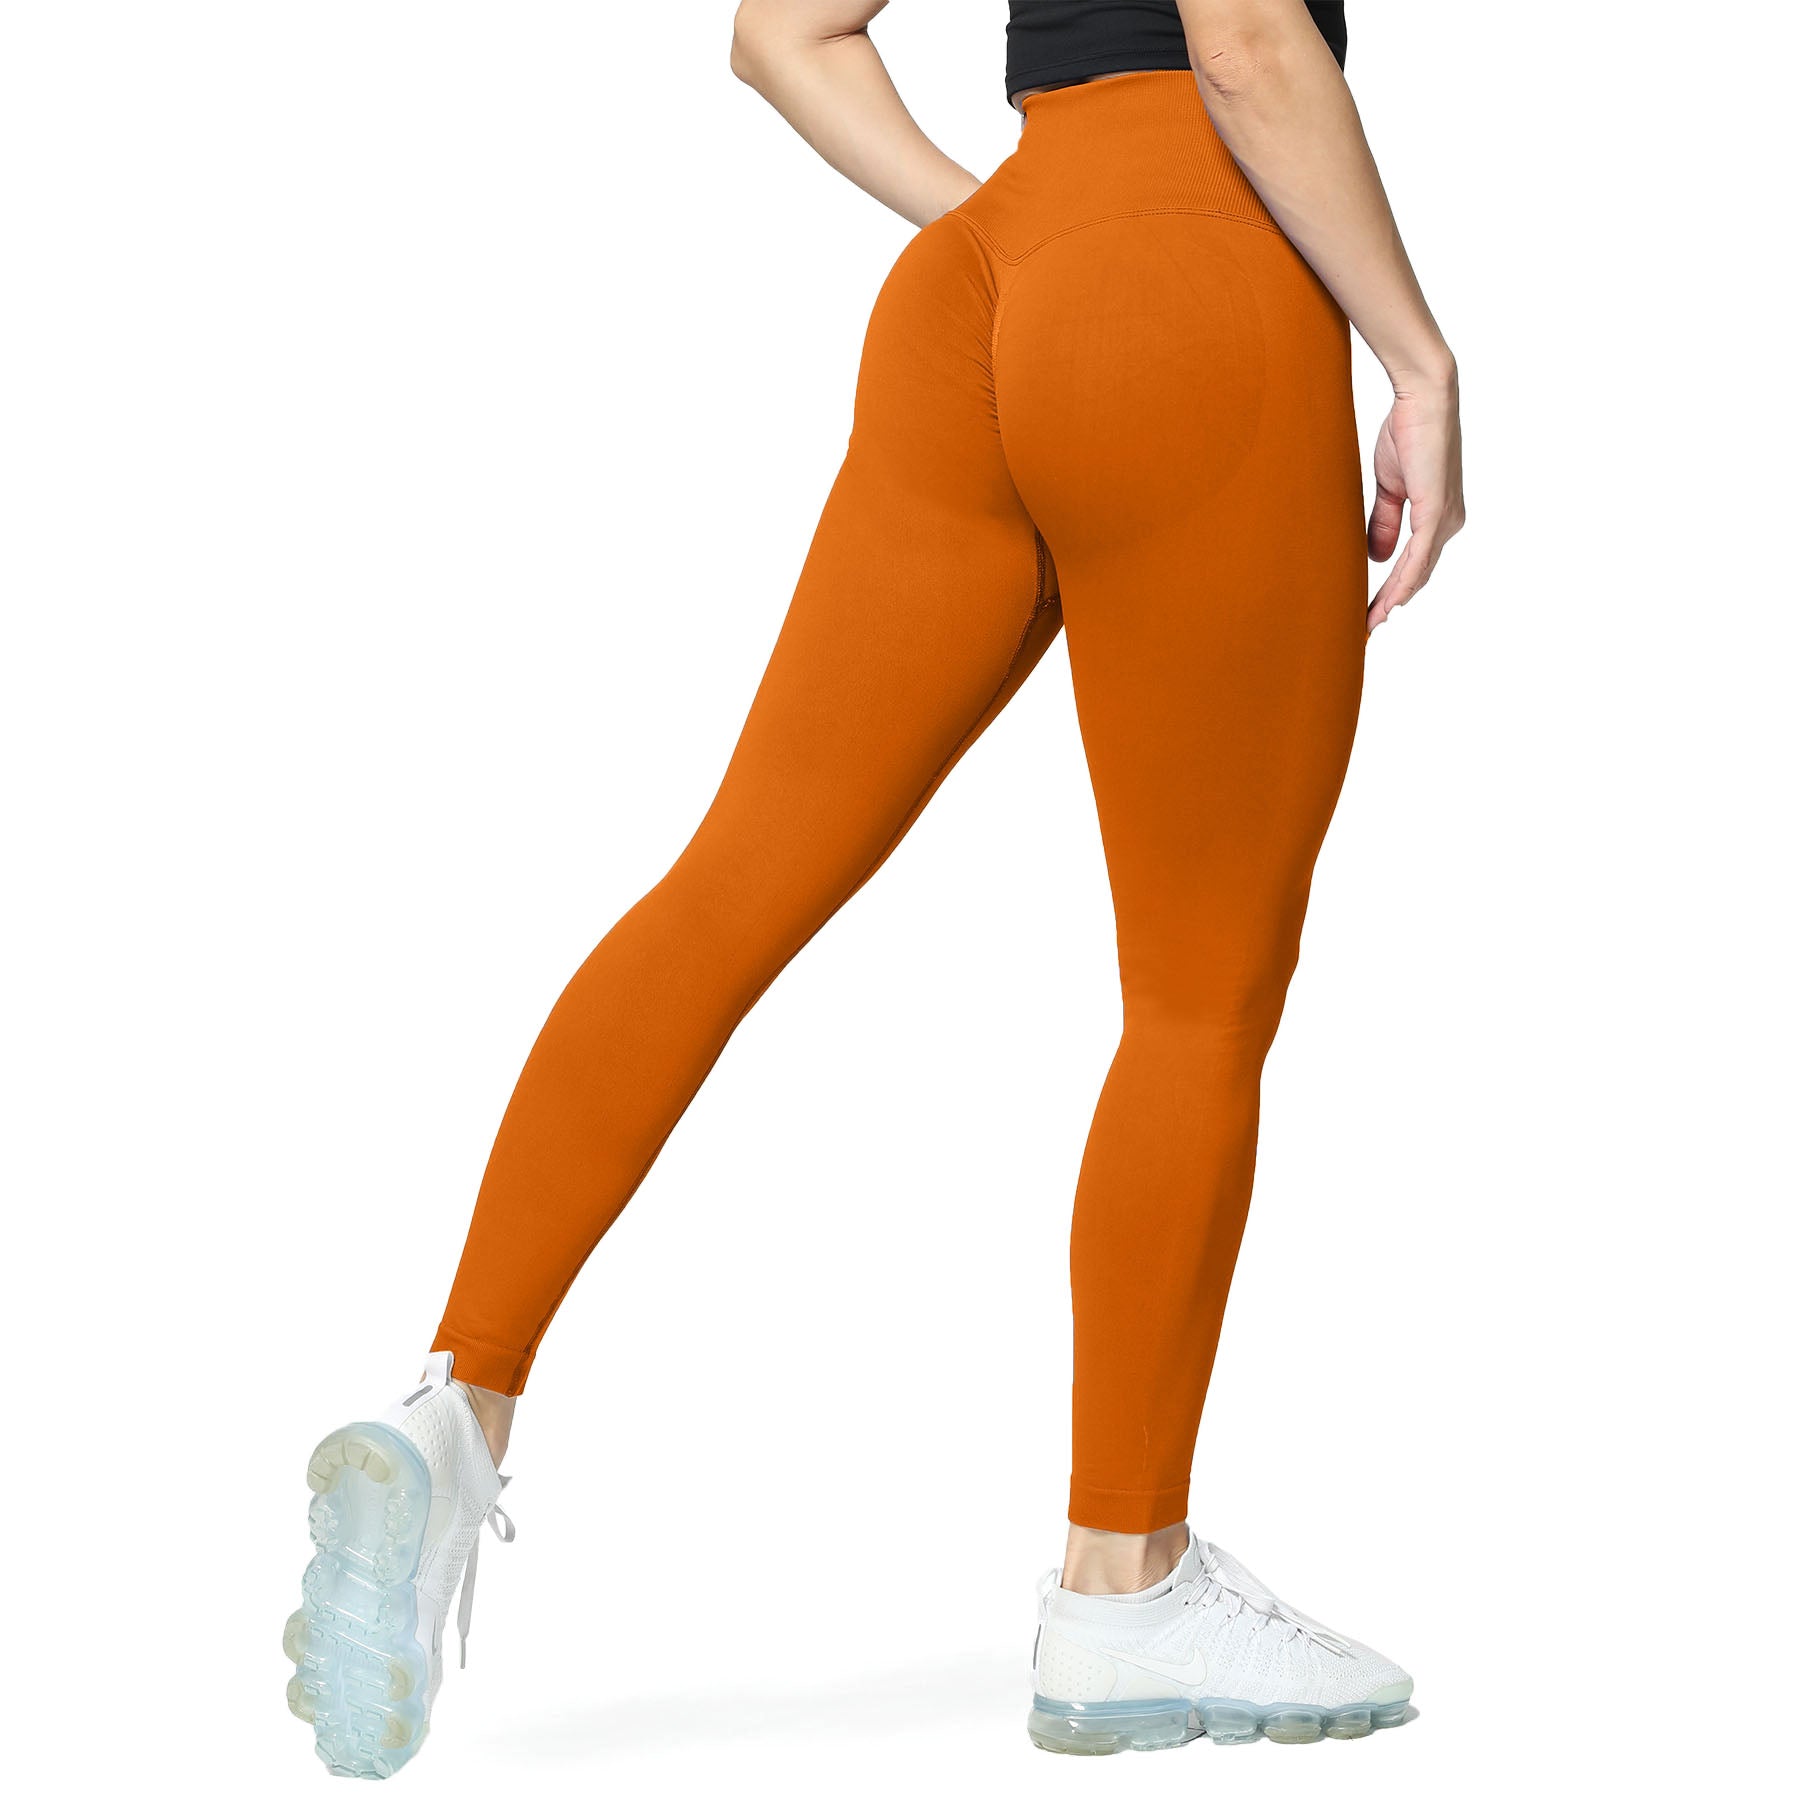 Aoxjox Workout Seamless Leggings for Women High Waisted Fitness